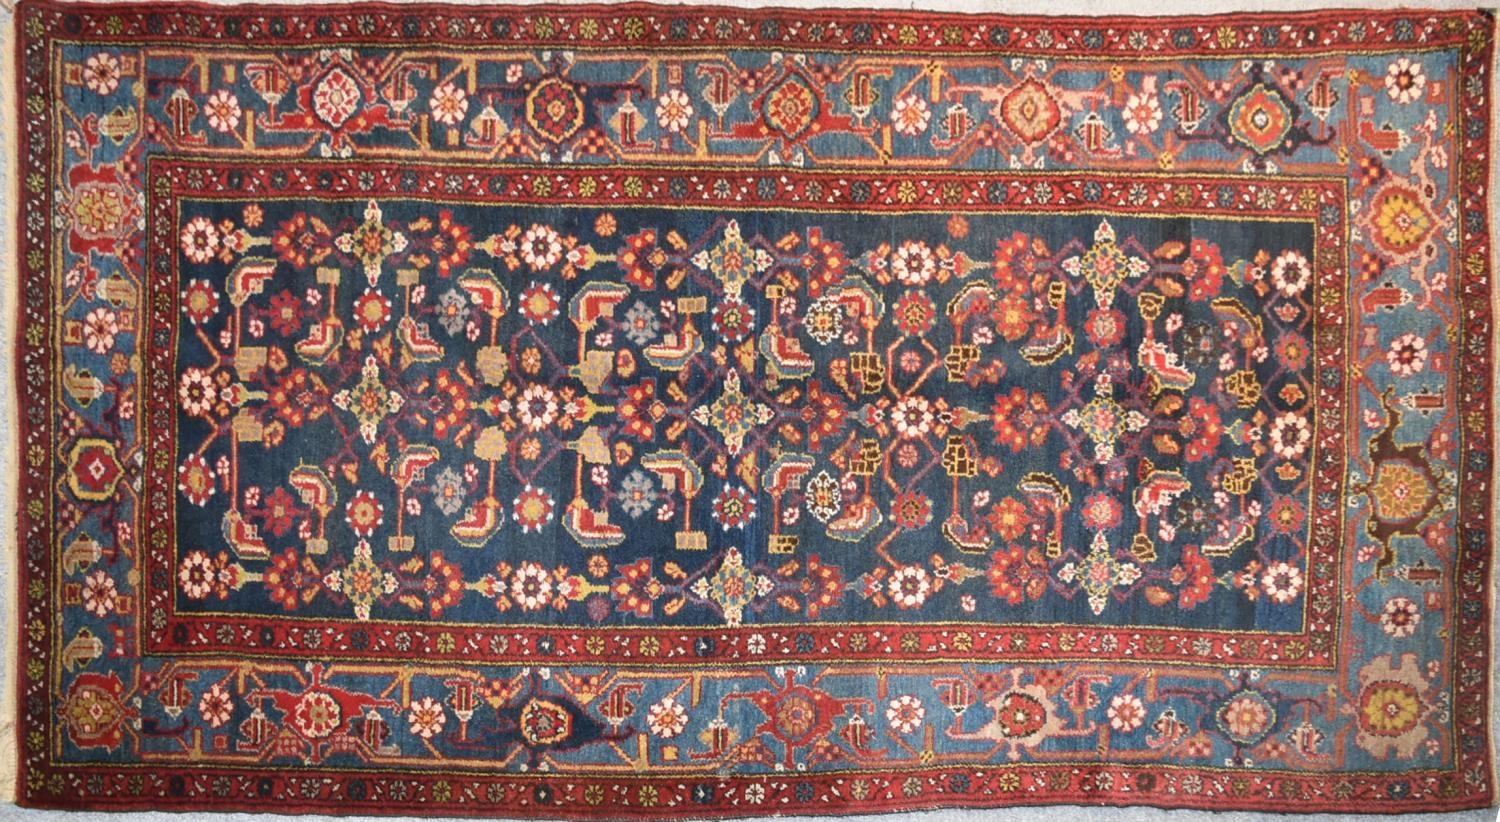 A Persian rug with complete floral and petal motifs on a midnight blue ground contained within